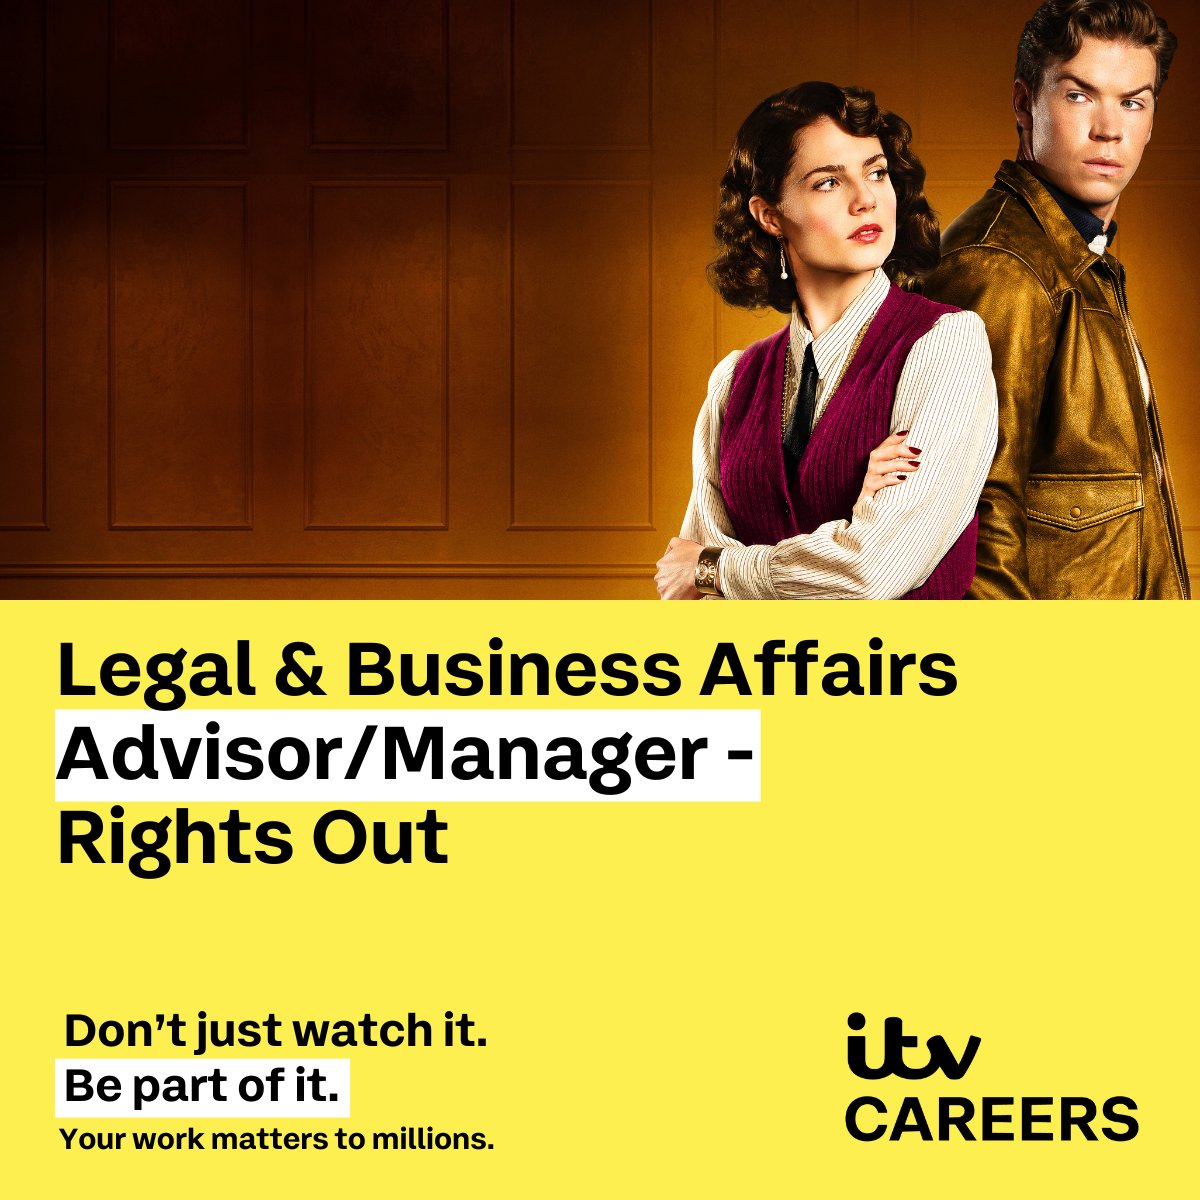 We are currently looking for a Legal & Business Affairs Advisor/Manager - Rights Out. Find out more here: itvjobs.referrals.selectminds.com/jobs/legal-bus… #LegalJobs #RightsOut #ITVCareers